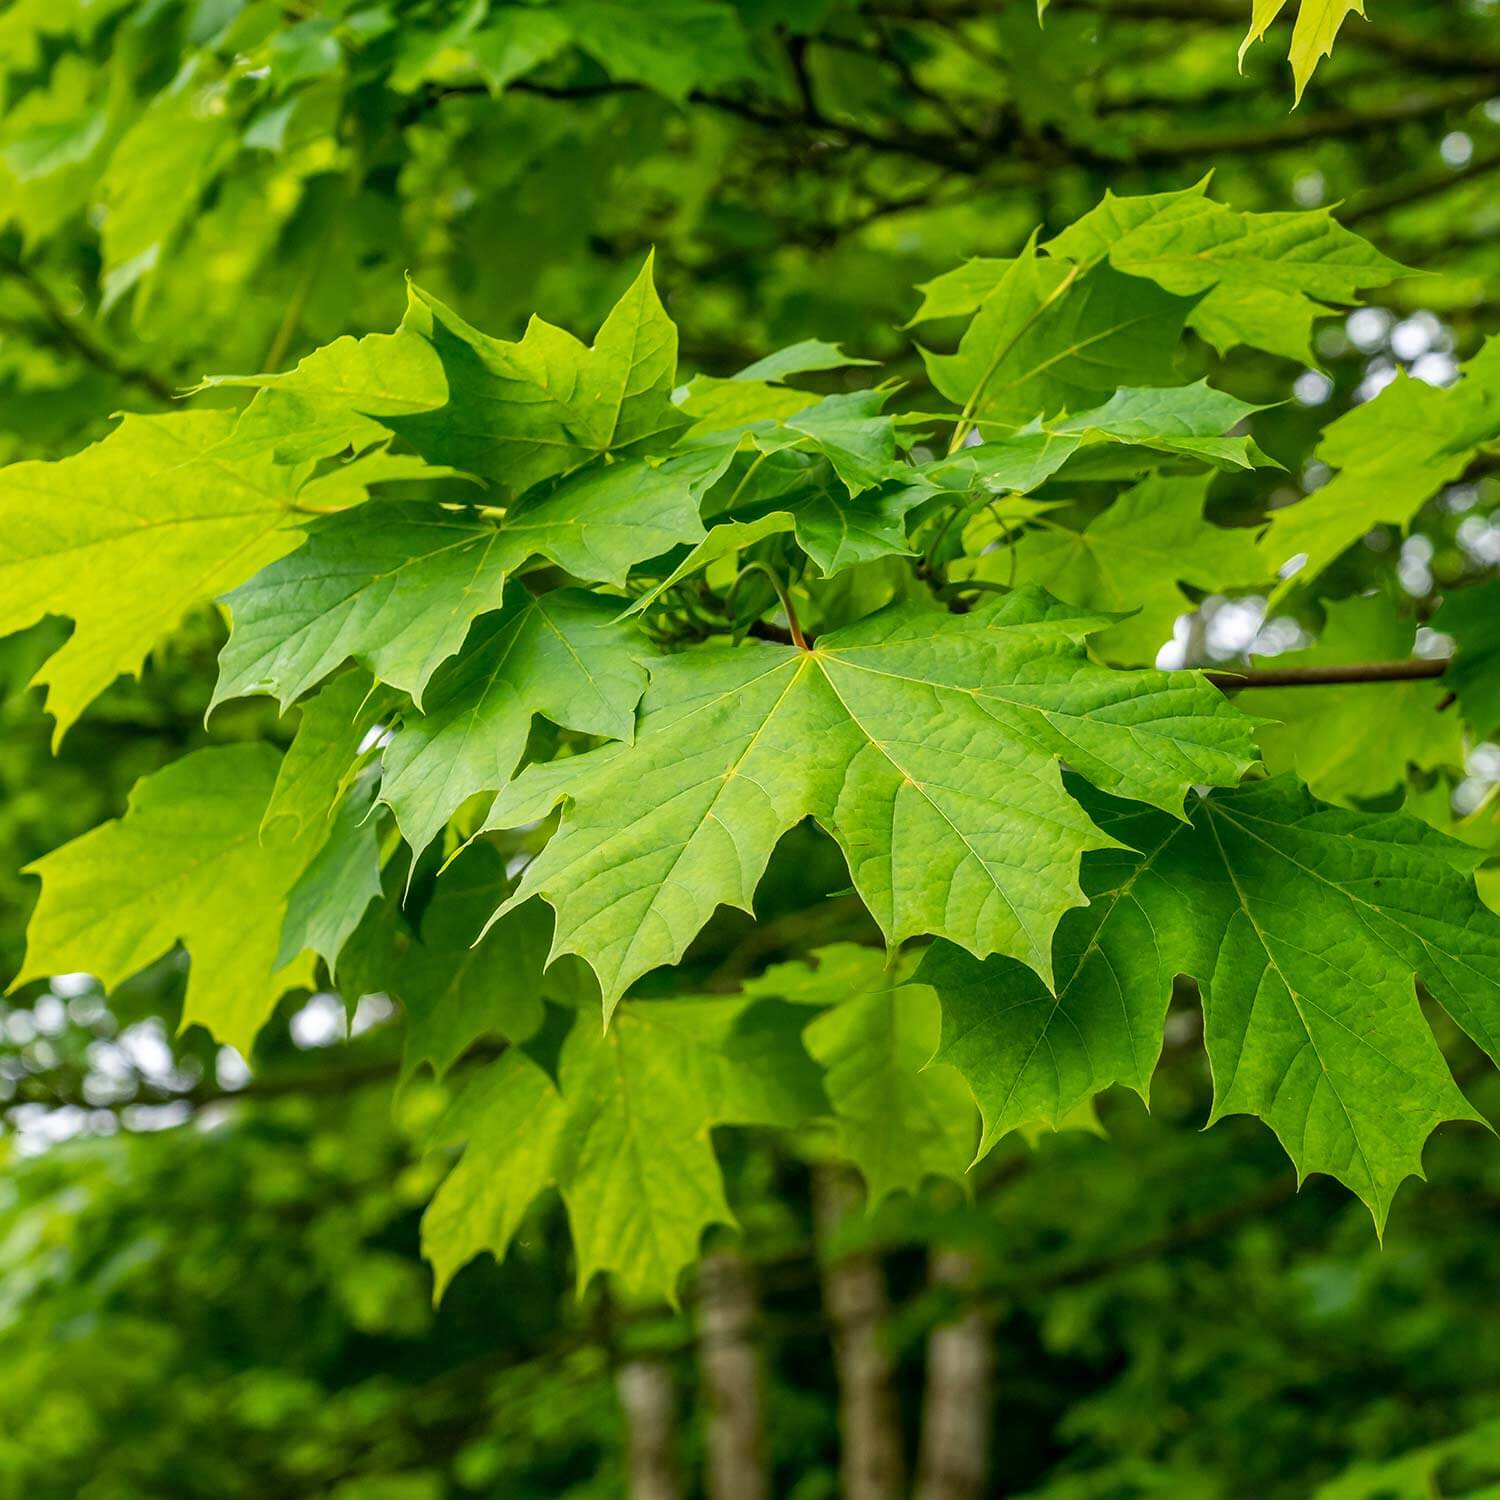 Five lobed green leaves on an Acer Saccharum, Sweet Maple, tree.